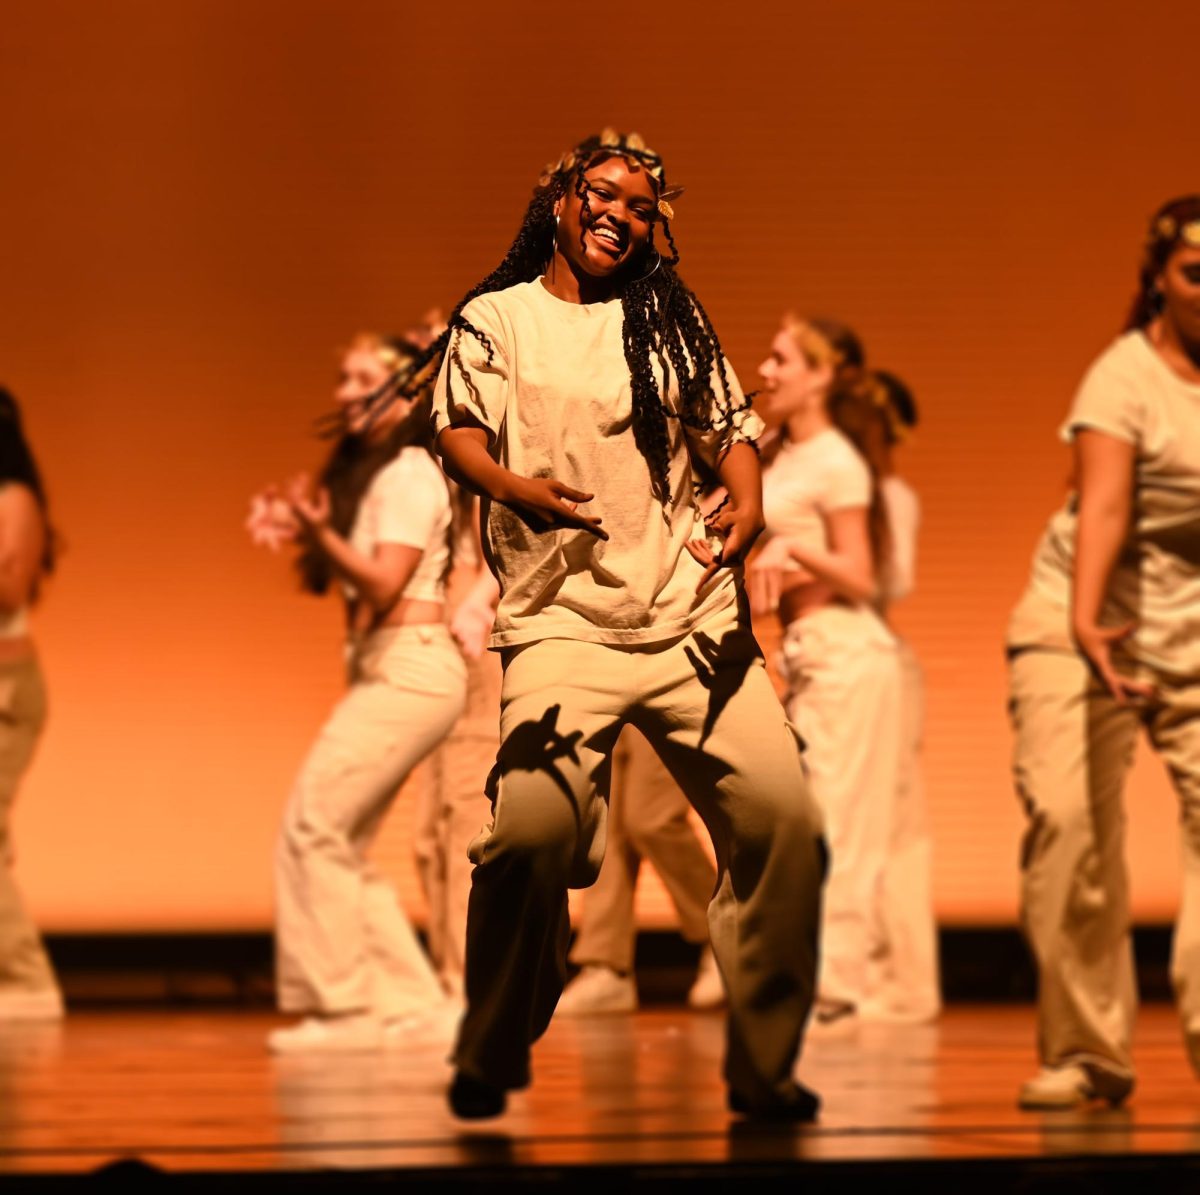 In an energetic and crowd-pleasing hip-hop number, dance company member Ocean Threats stands center stage, showcasing her passion for what she does.